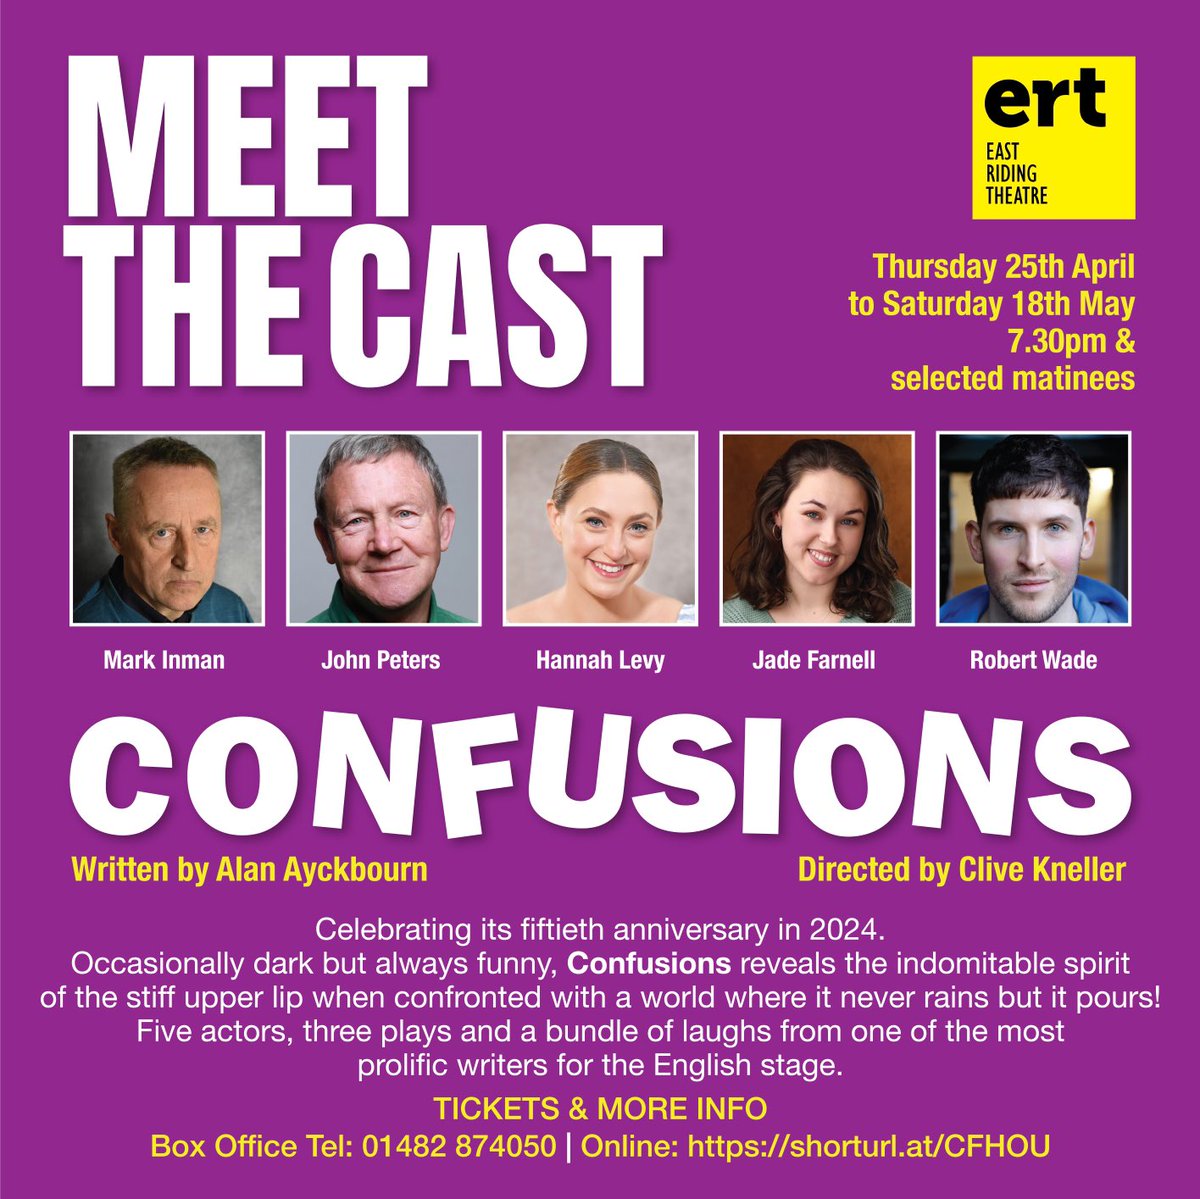 DON'T MISS THIS MASTERPIECE FROM ALAN AYKBOURN... CONFUSIONS Thu 25th April - Sat 18th May 7.30pm & selected matinees 5 actors, 3 plays & a bundle of laughs from one of the most prolific writers for the English stage. TICKETS & INFO 01482 874050 shorturl.at/CFHOU